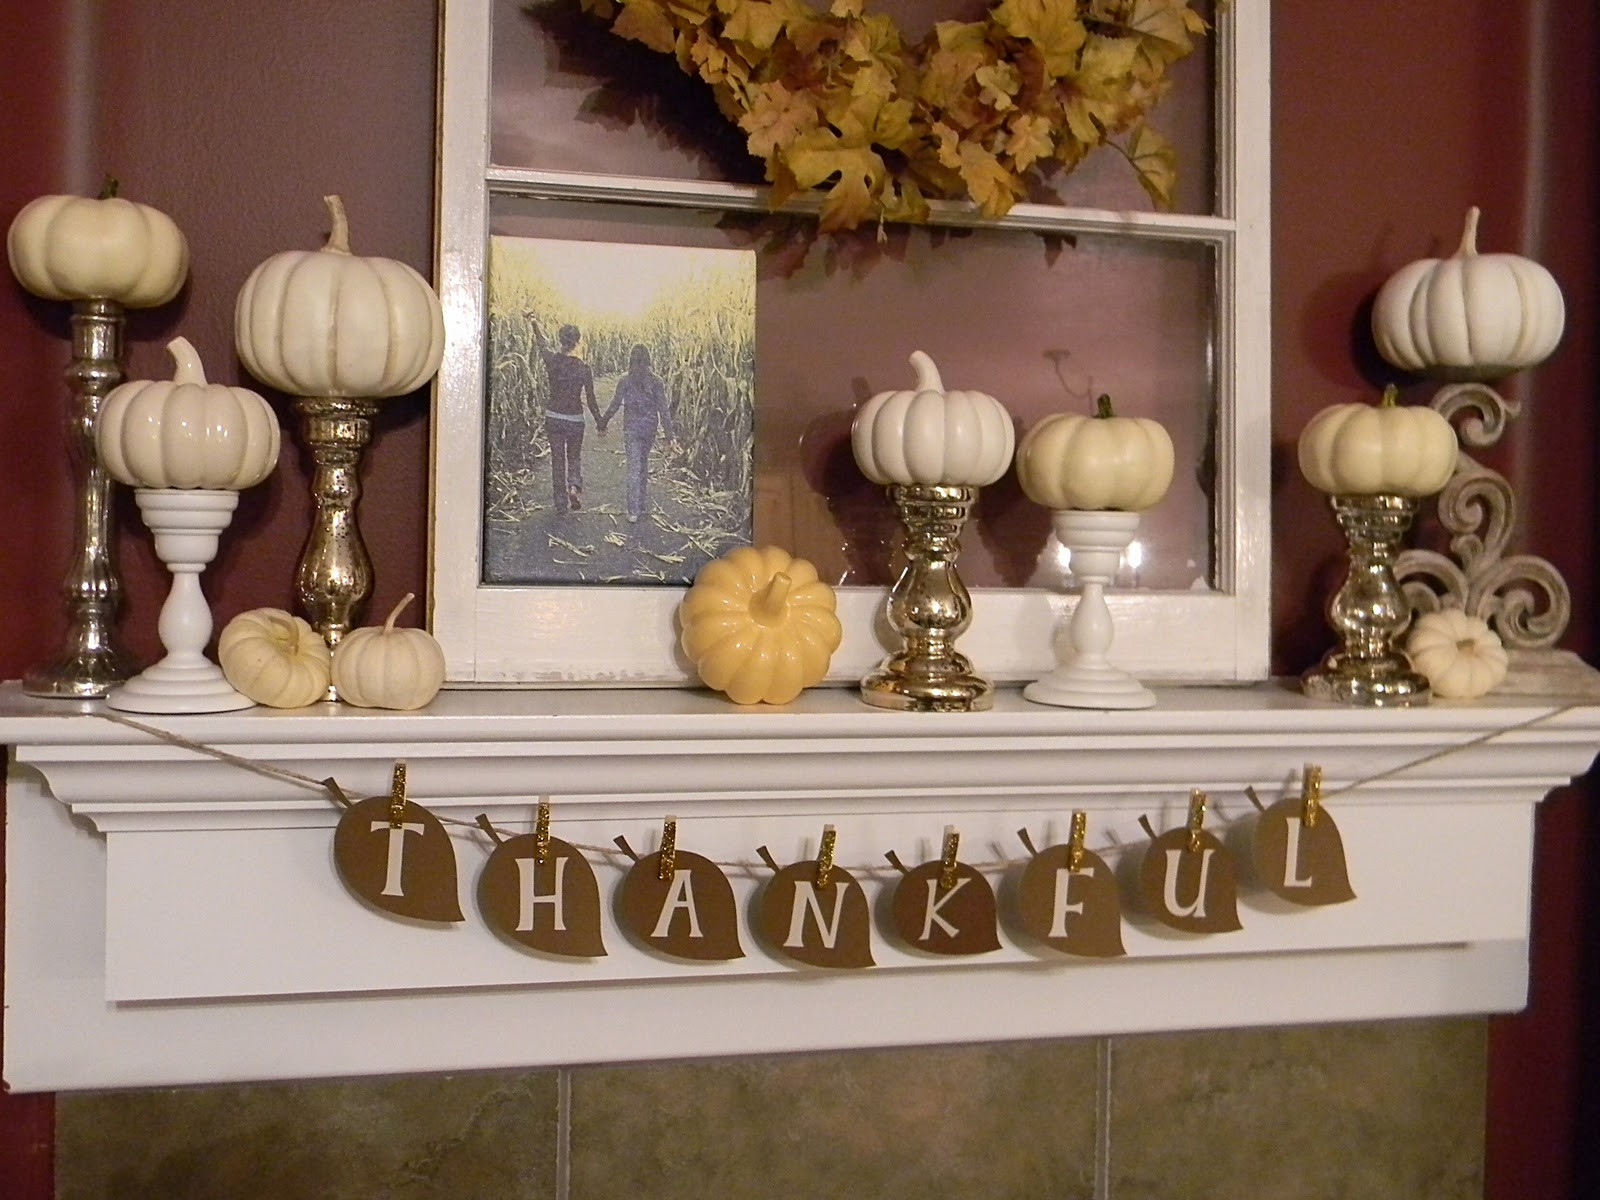 Ideas For Thanksgiving Decorating
 It s Written on the Wall 11 Ideas for your Thanksgiving